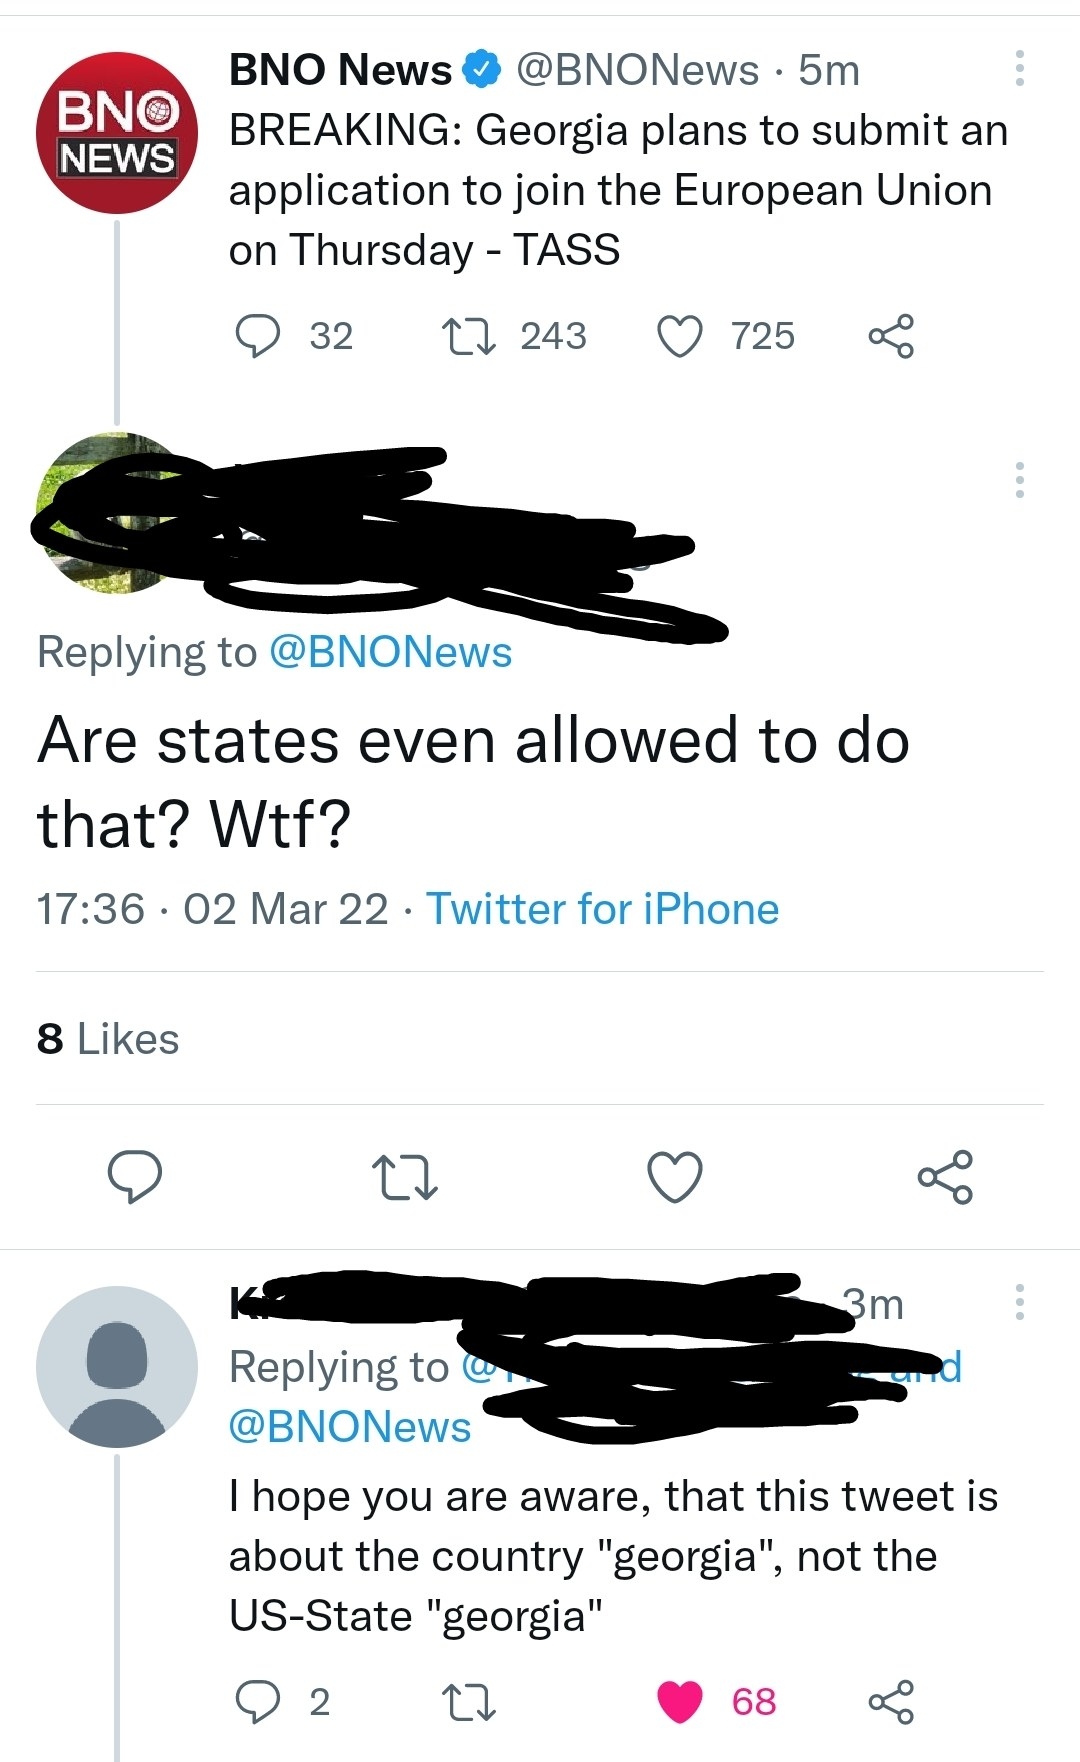 American who does not know georgia is also a country